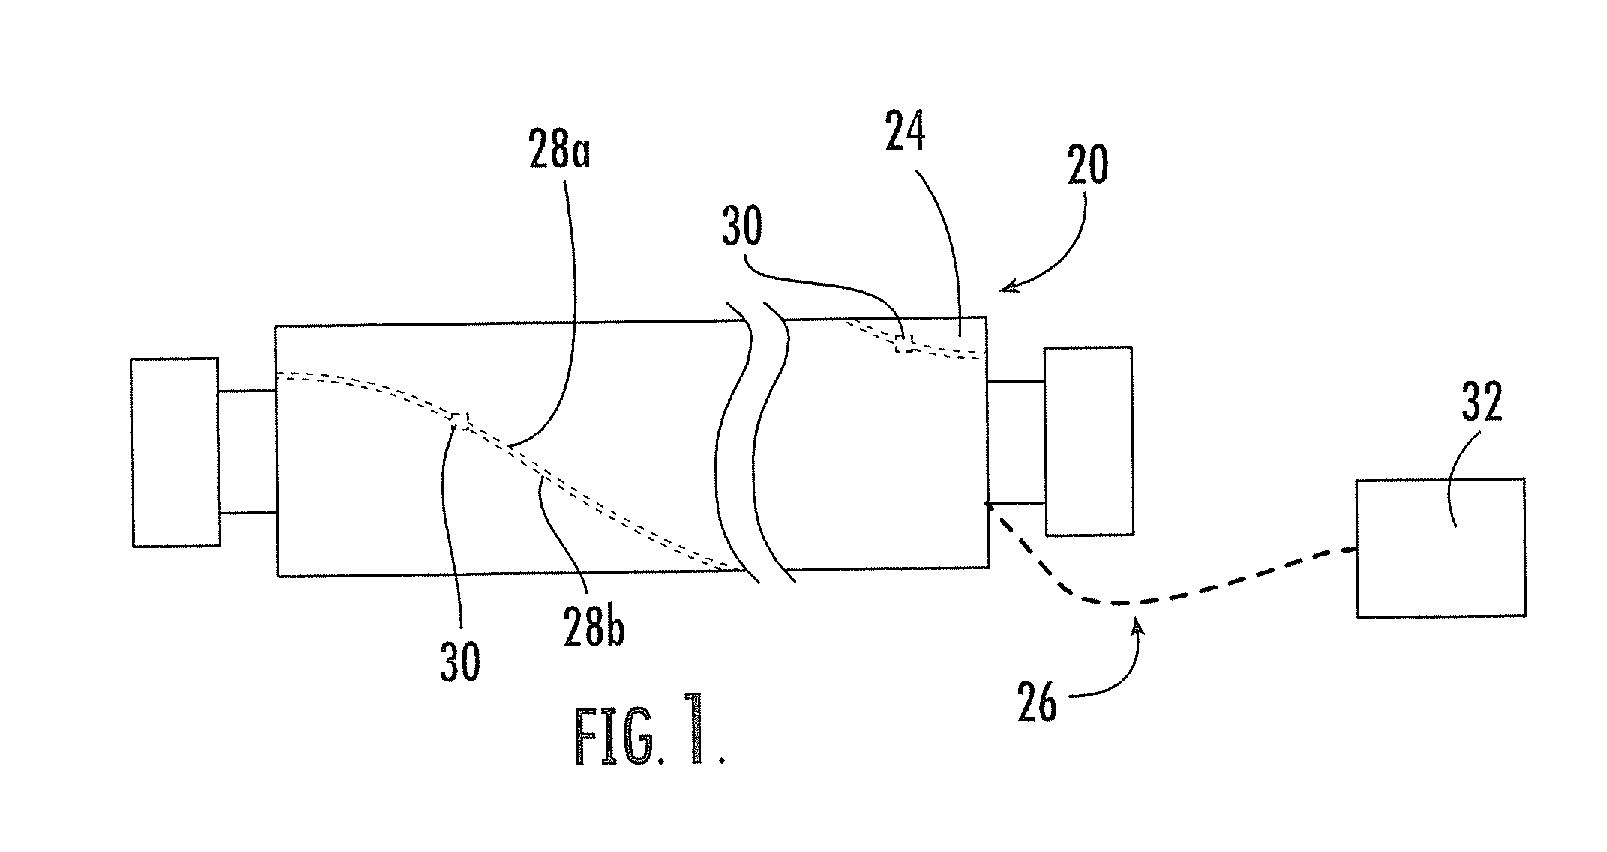 Industrial Roll With Sensors Arranged To Self-Identify Angular Location